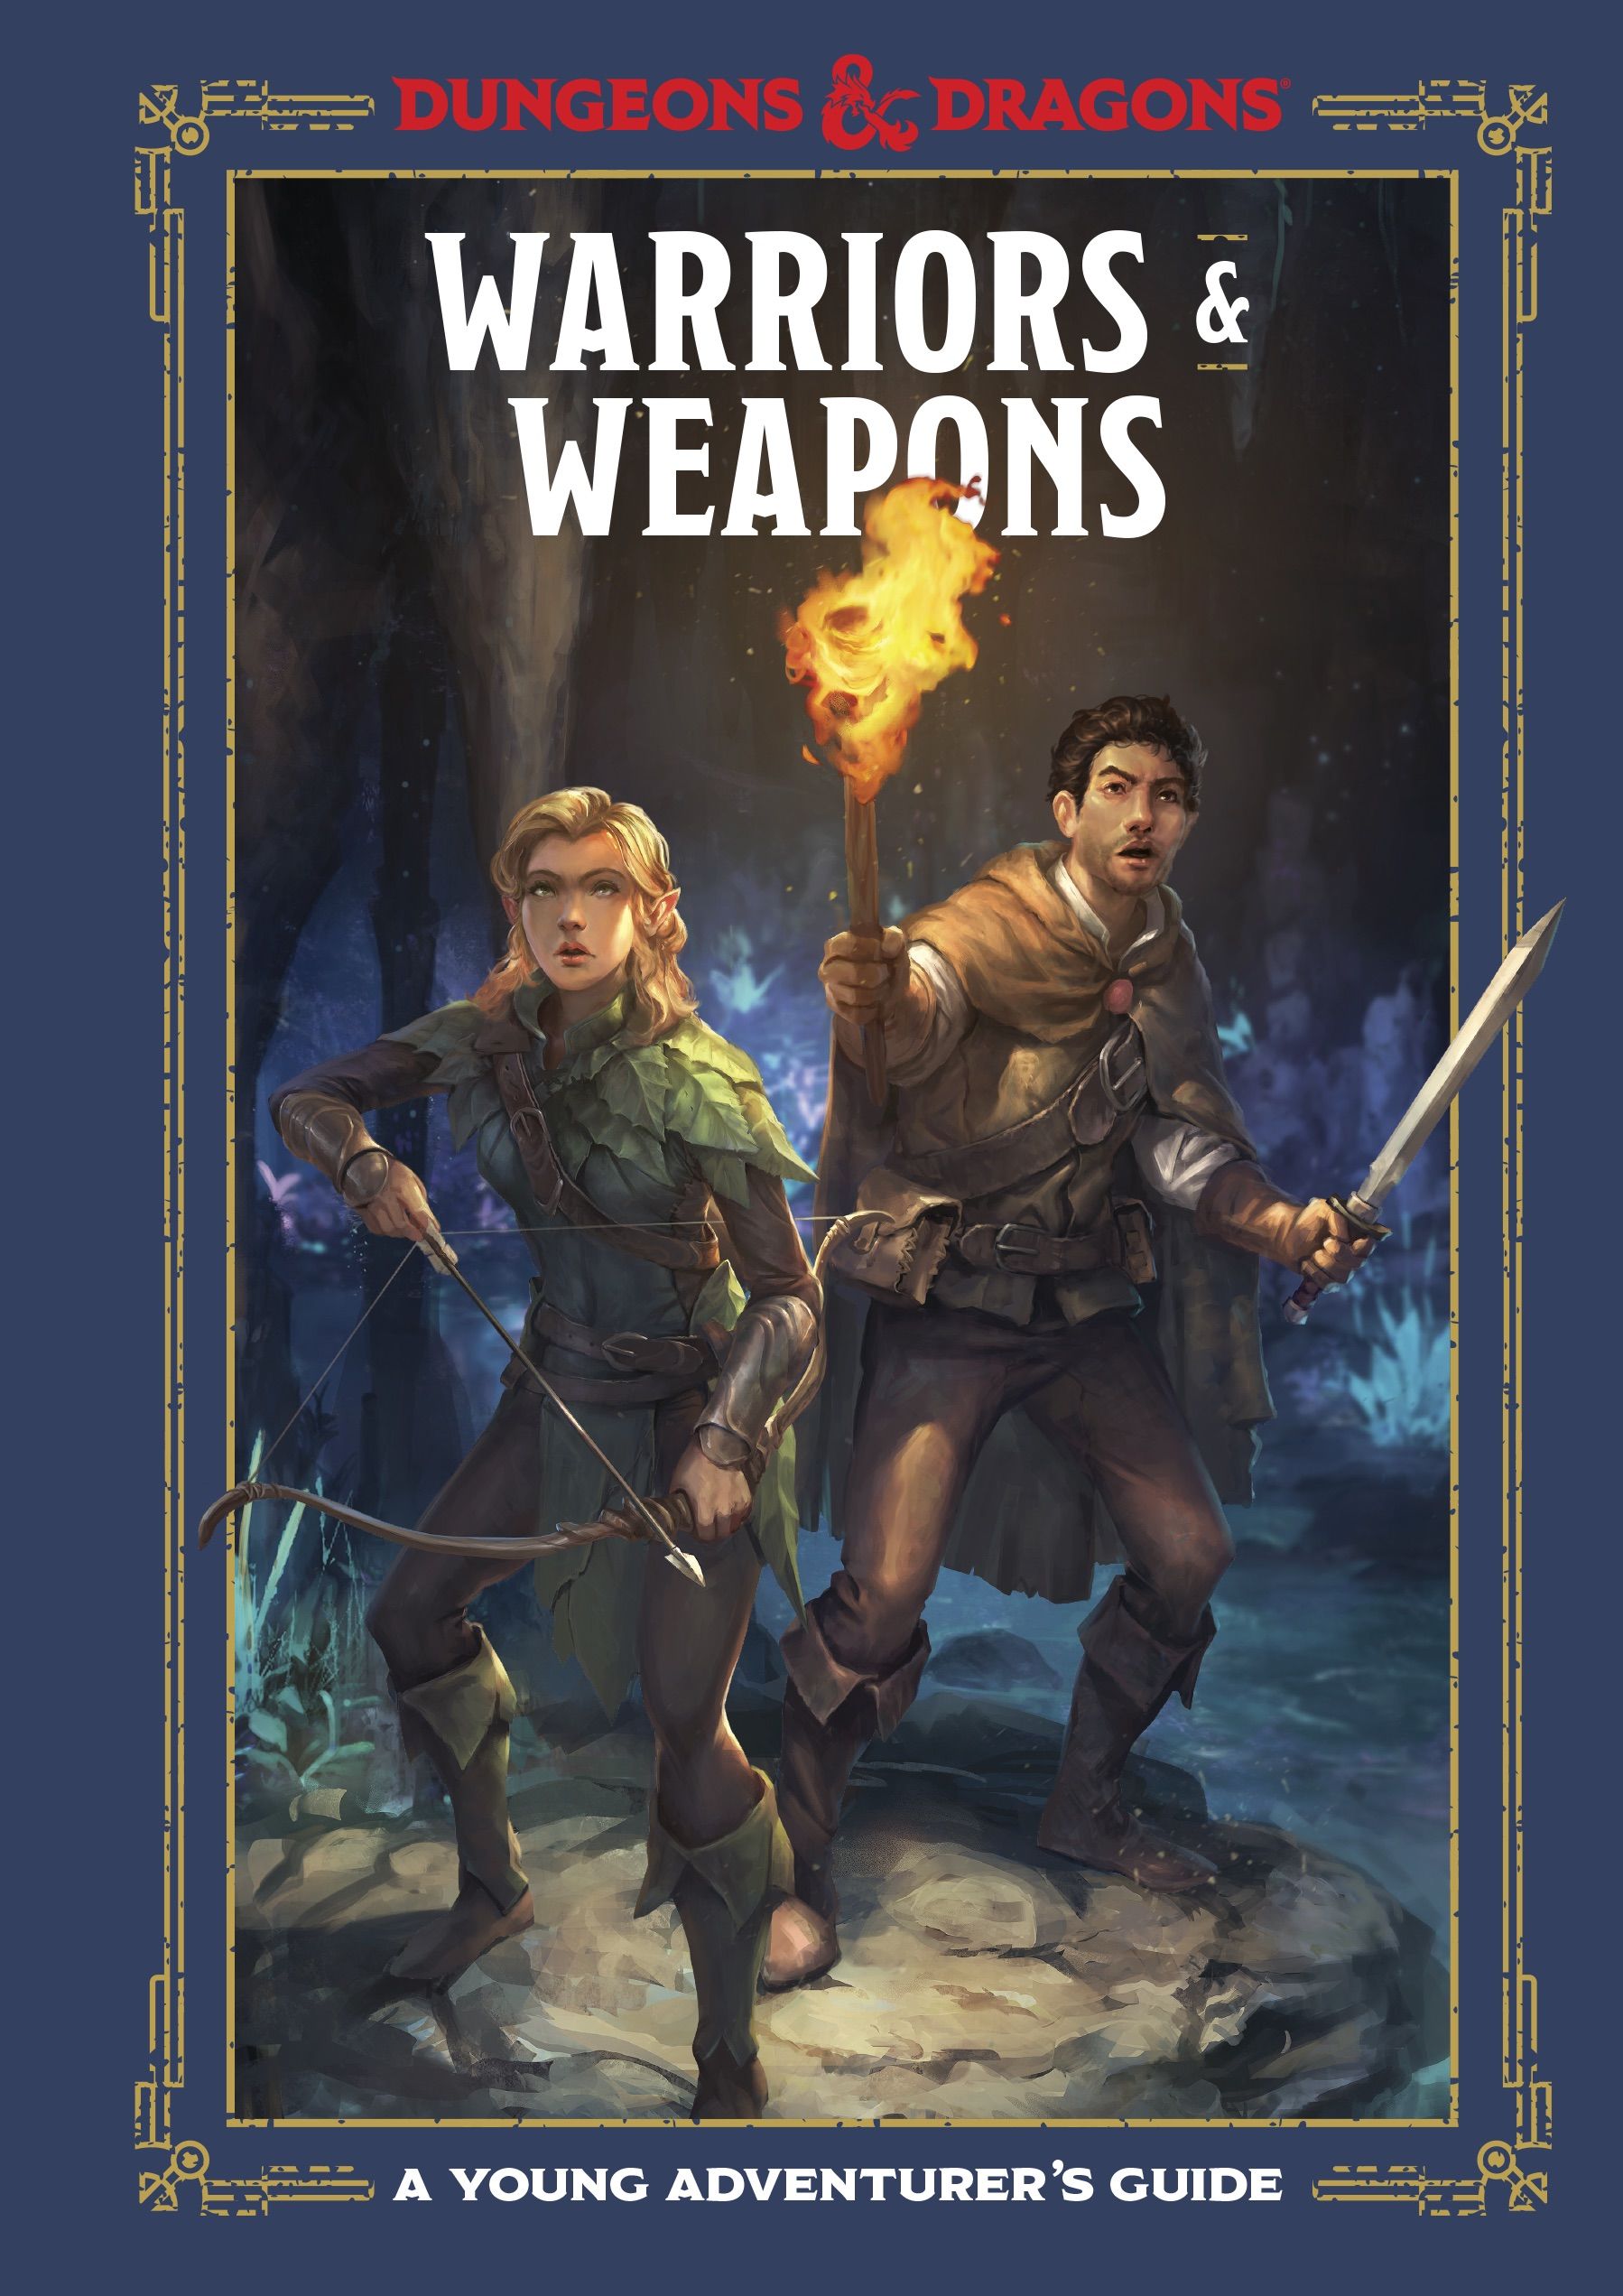 Warriors & Weapons Dungeons & Dragons guide